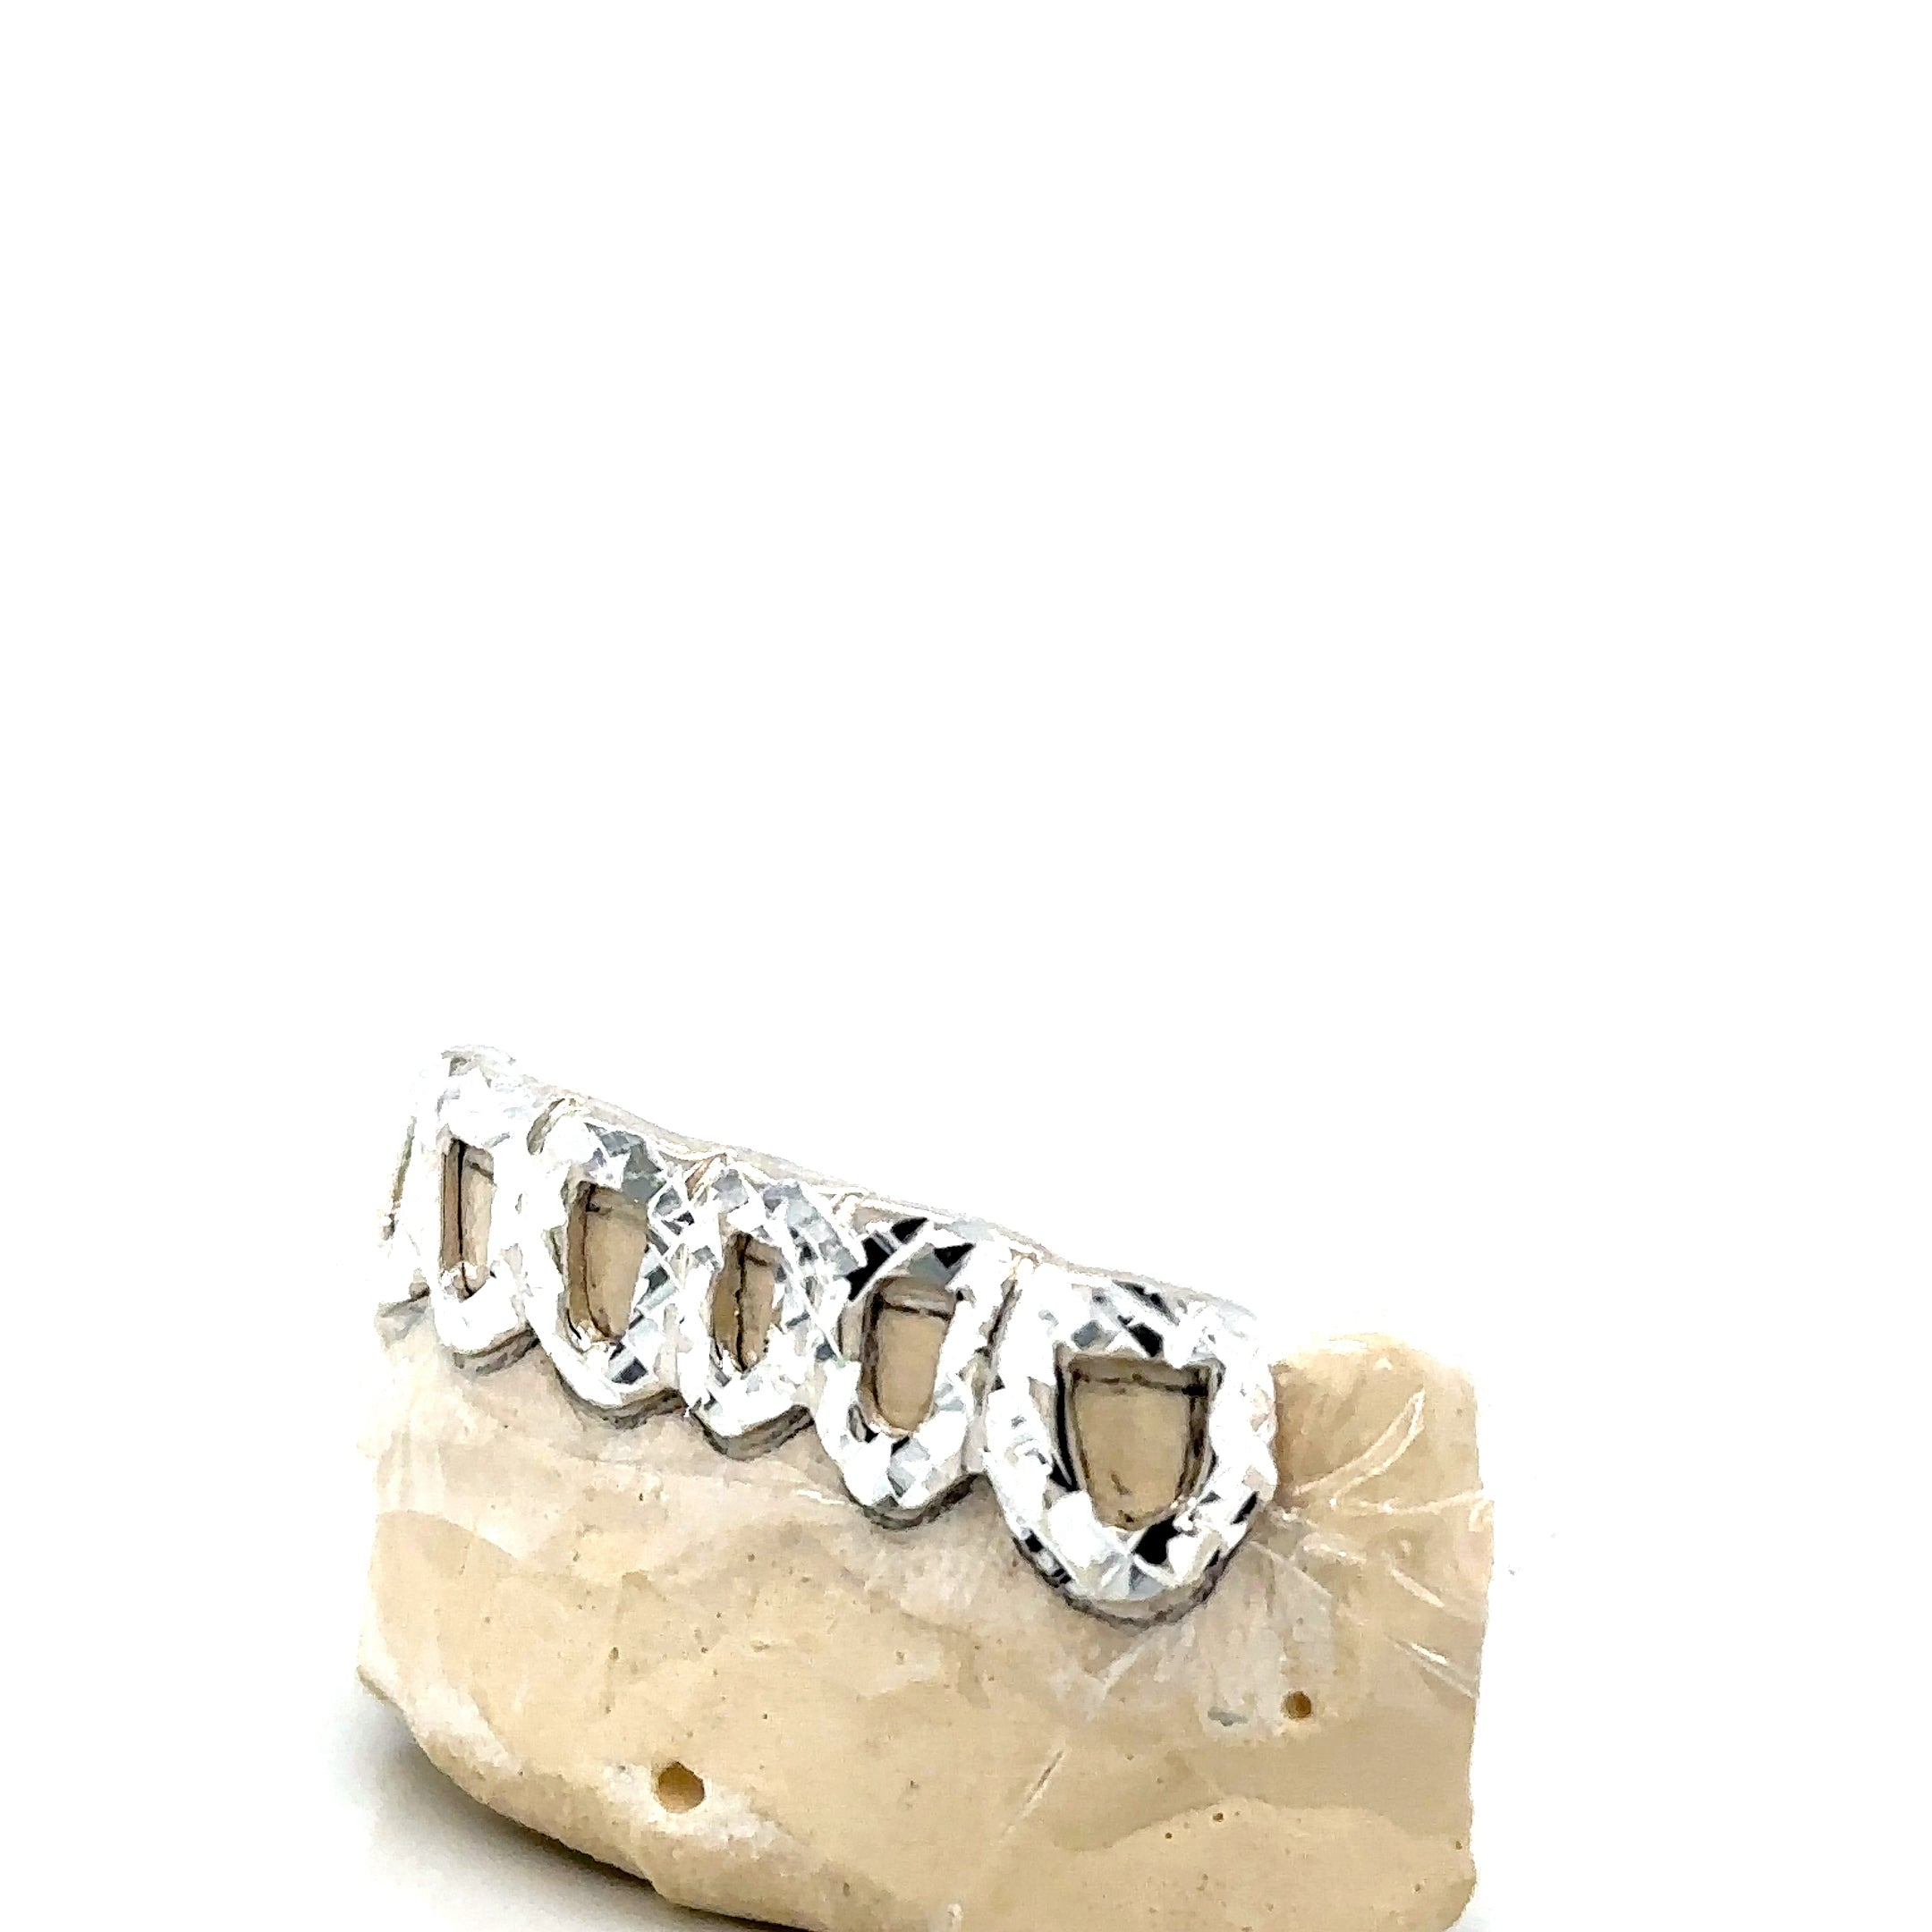 6pc Silver Open Face Dusted Grillz